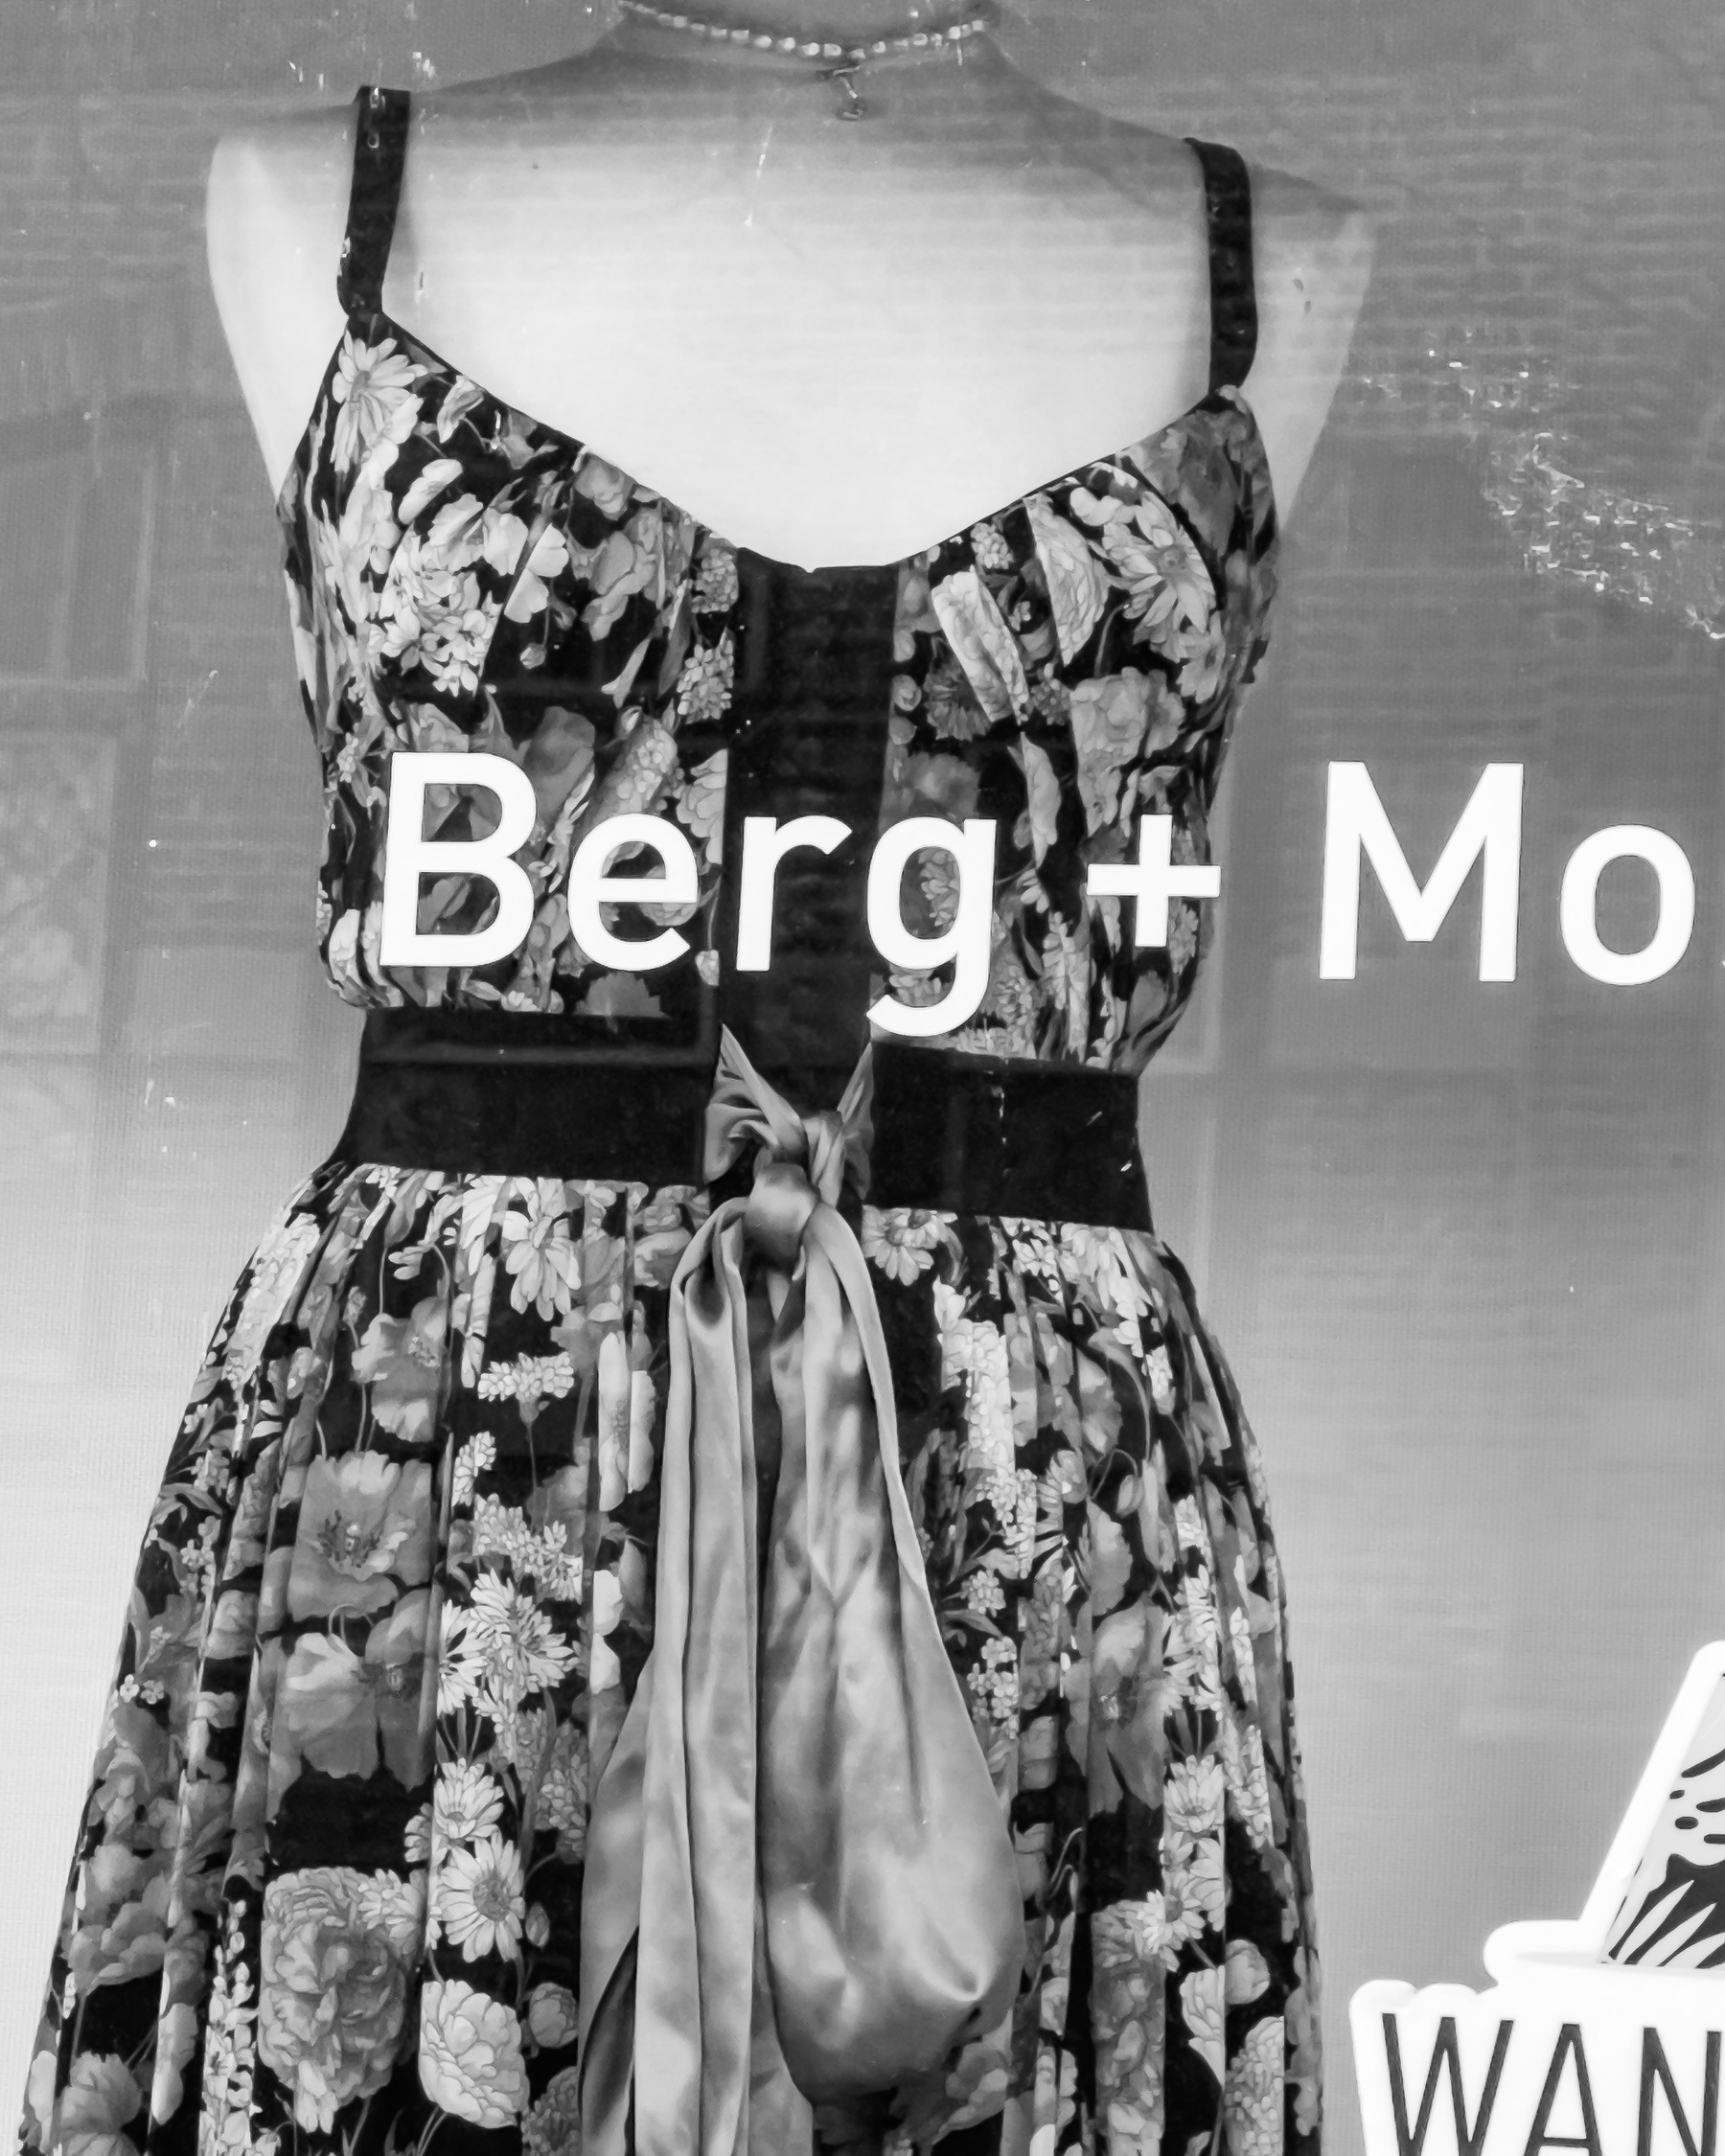 A bare shouldered floral print dress gathered at the waist on a female mannequin form in a shop window. Barg + Mo stenciled on the window just below the breasts of the mannequin form.